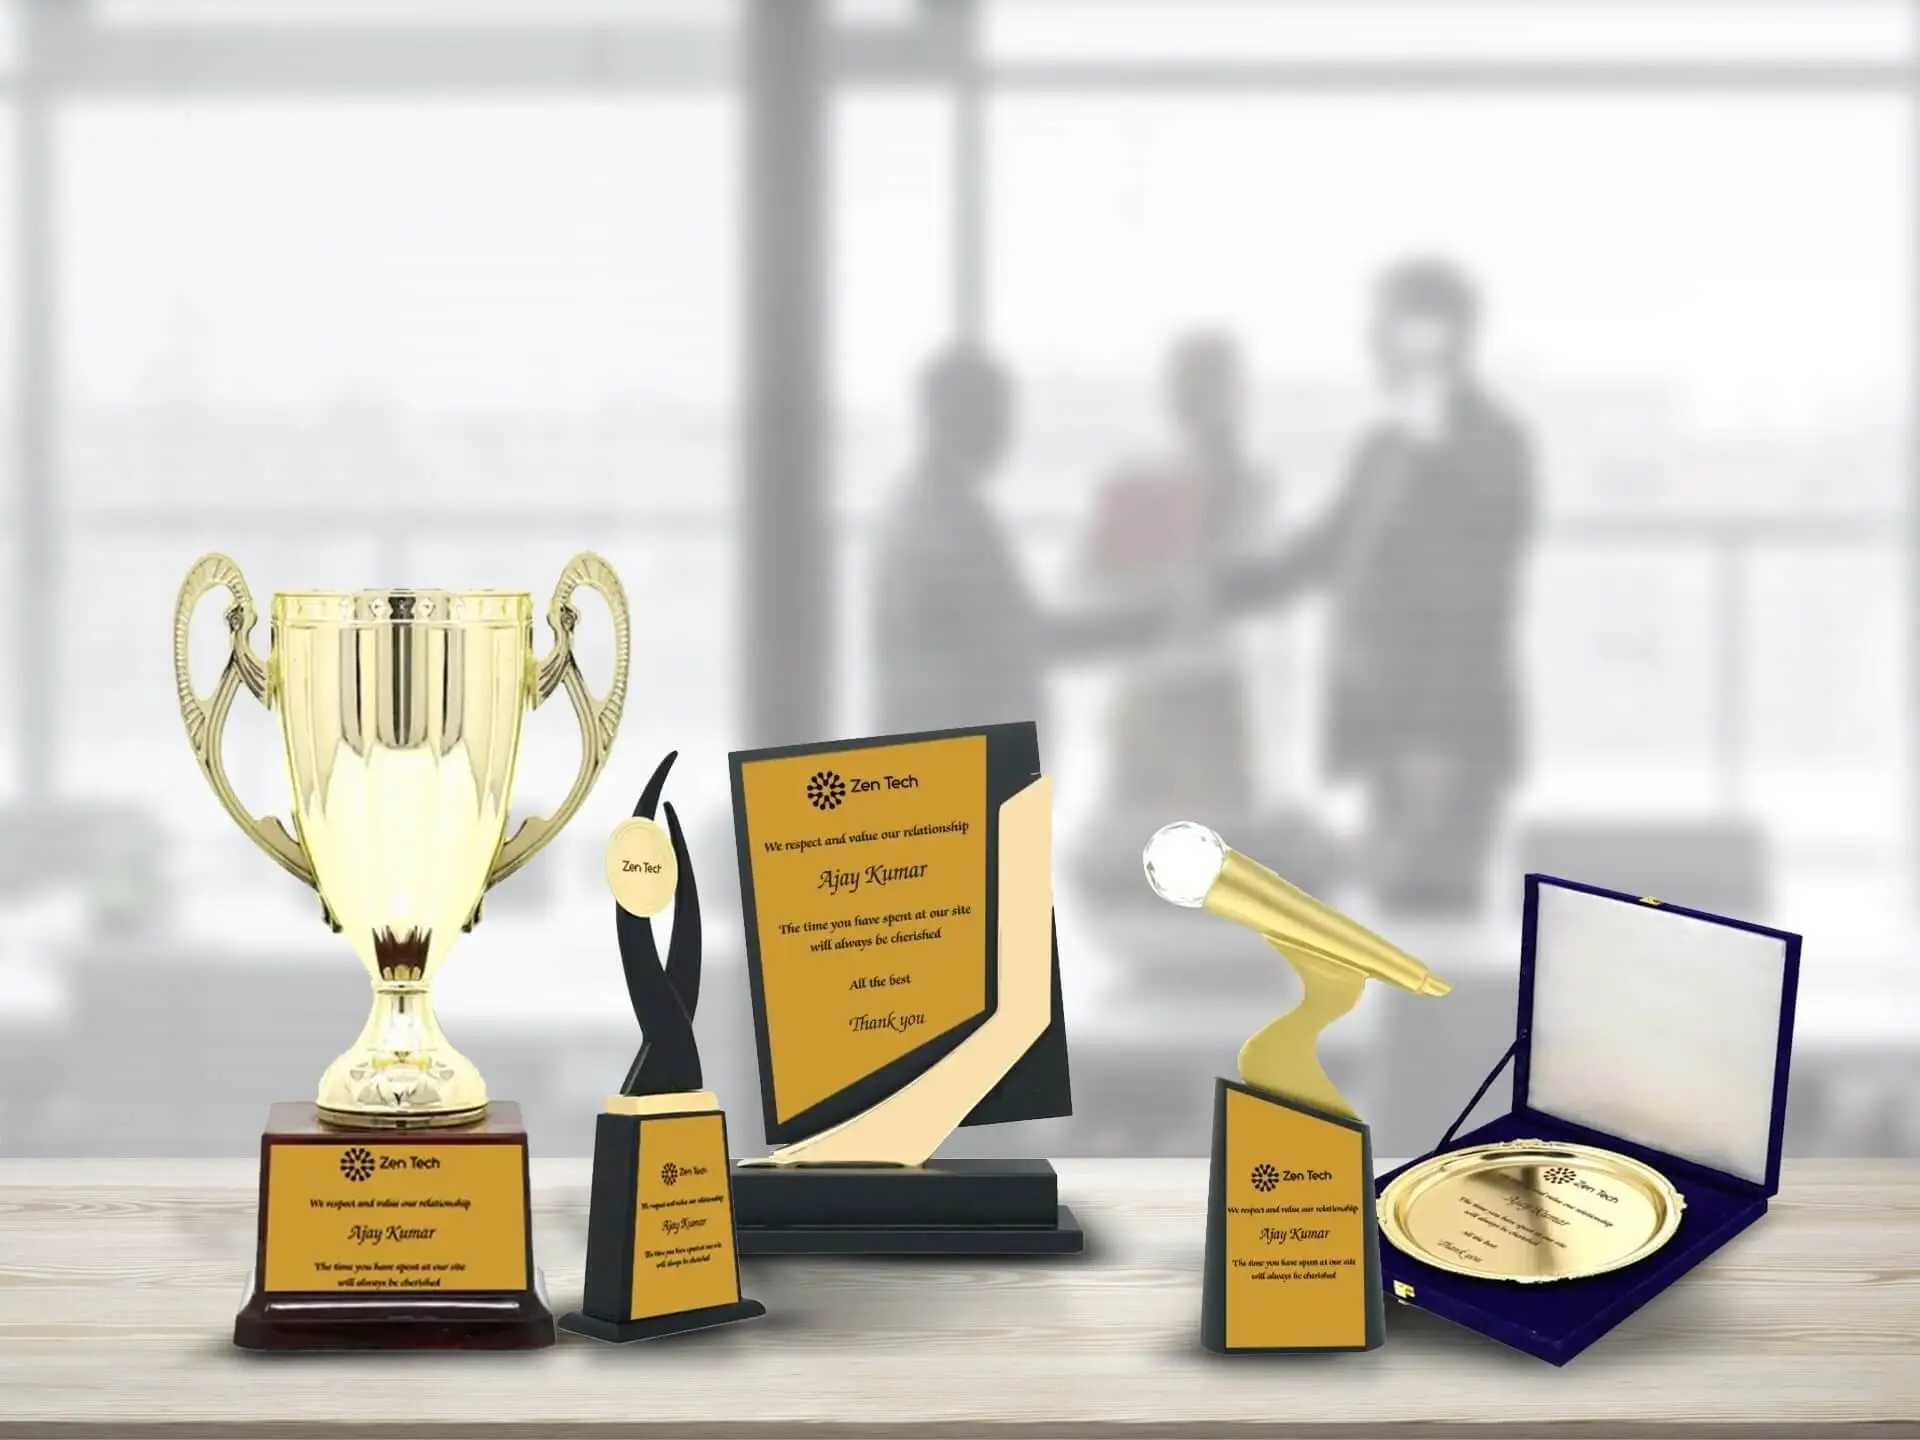 Personalized Awards & Trophies